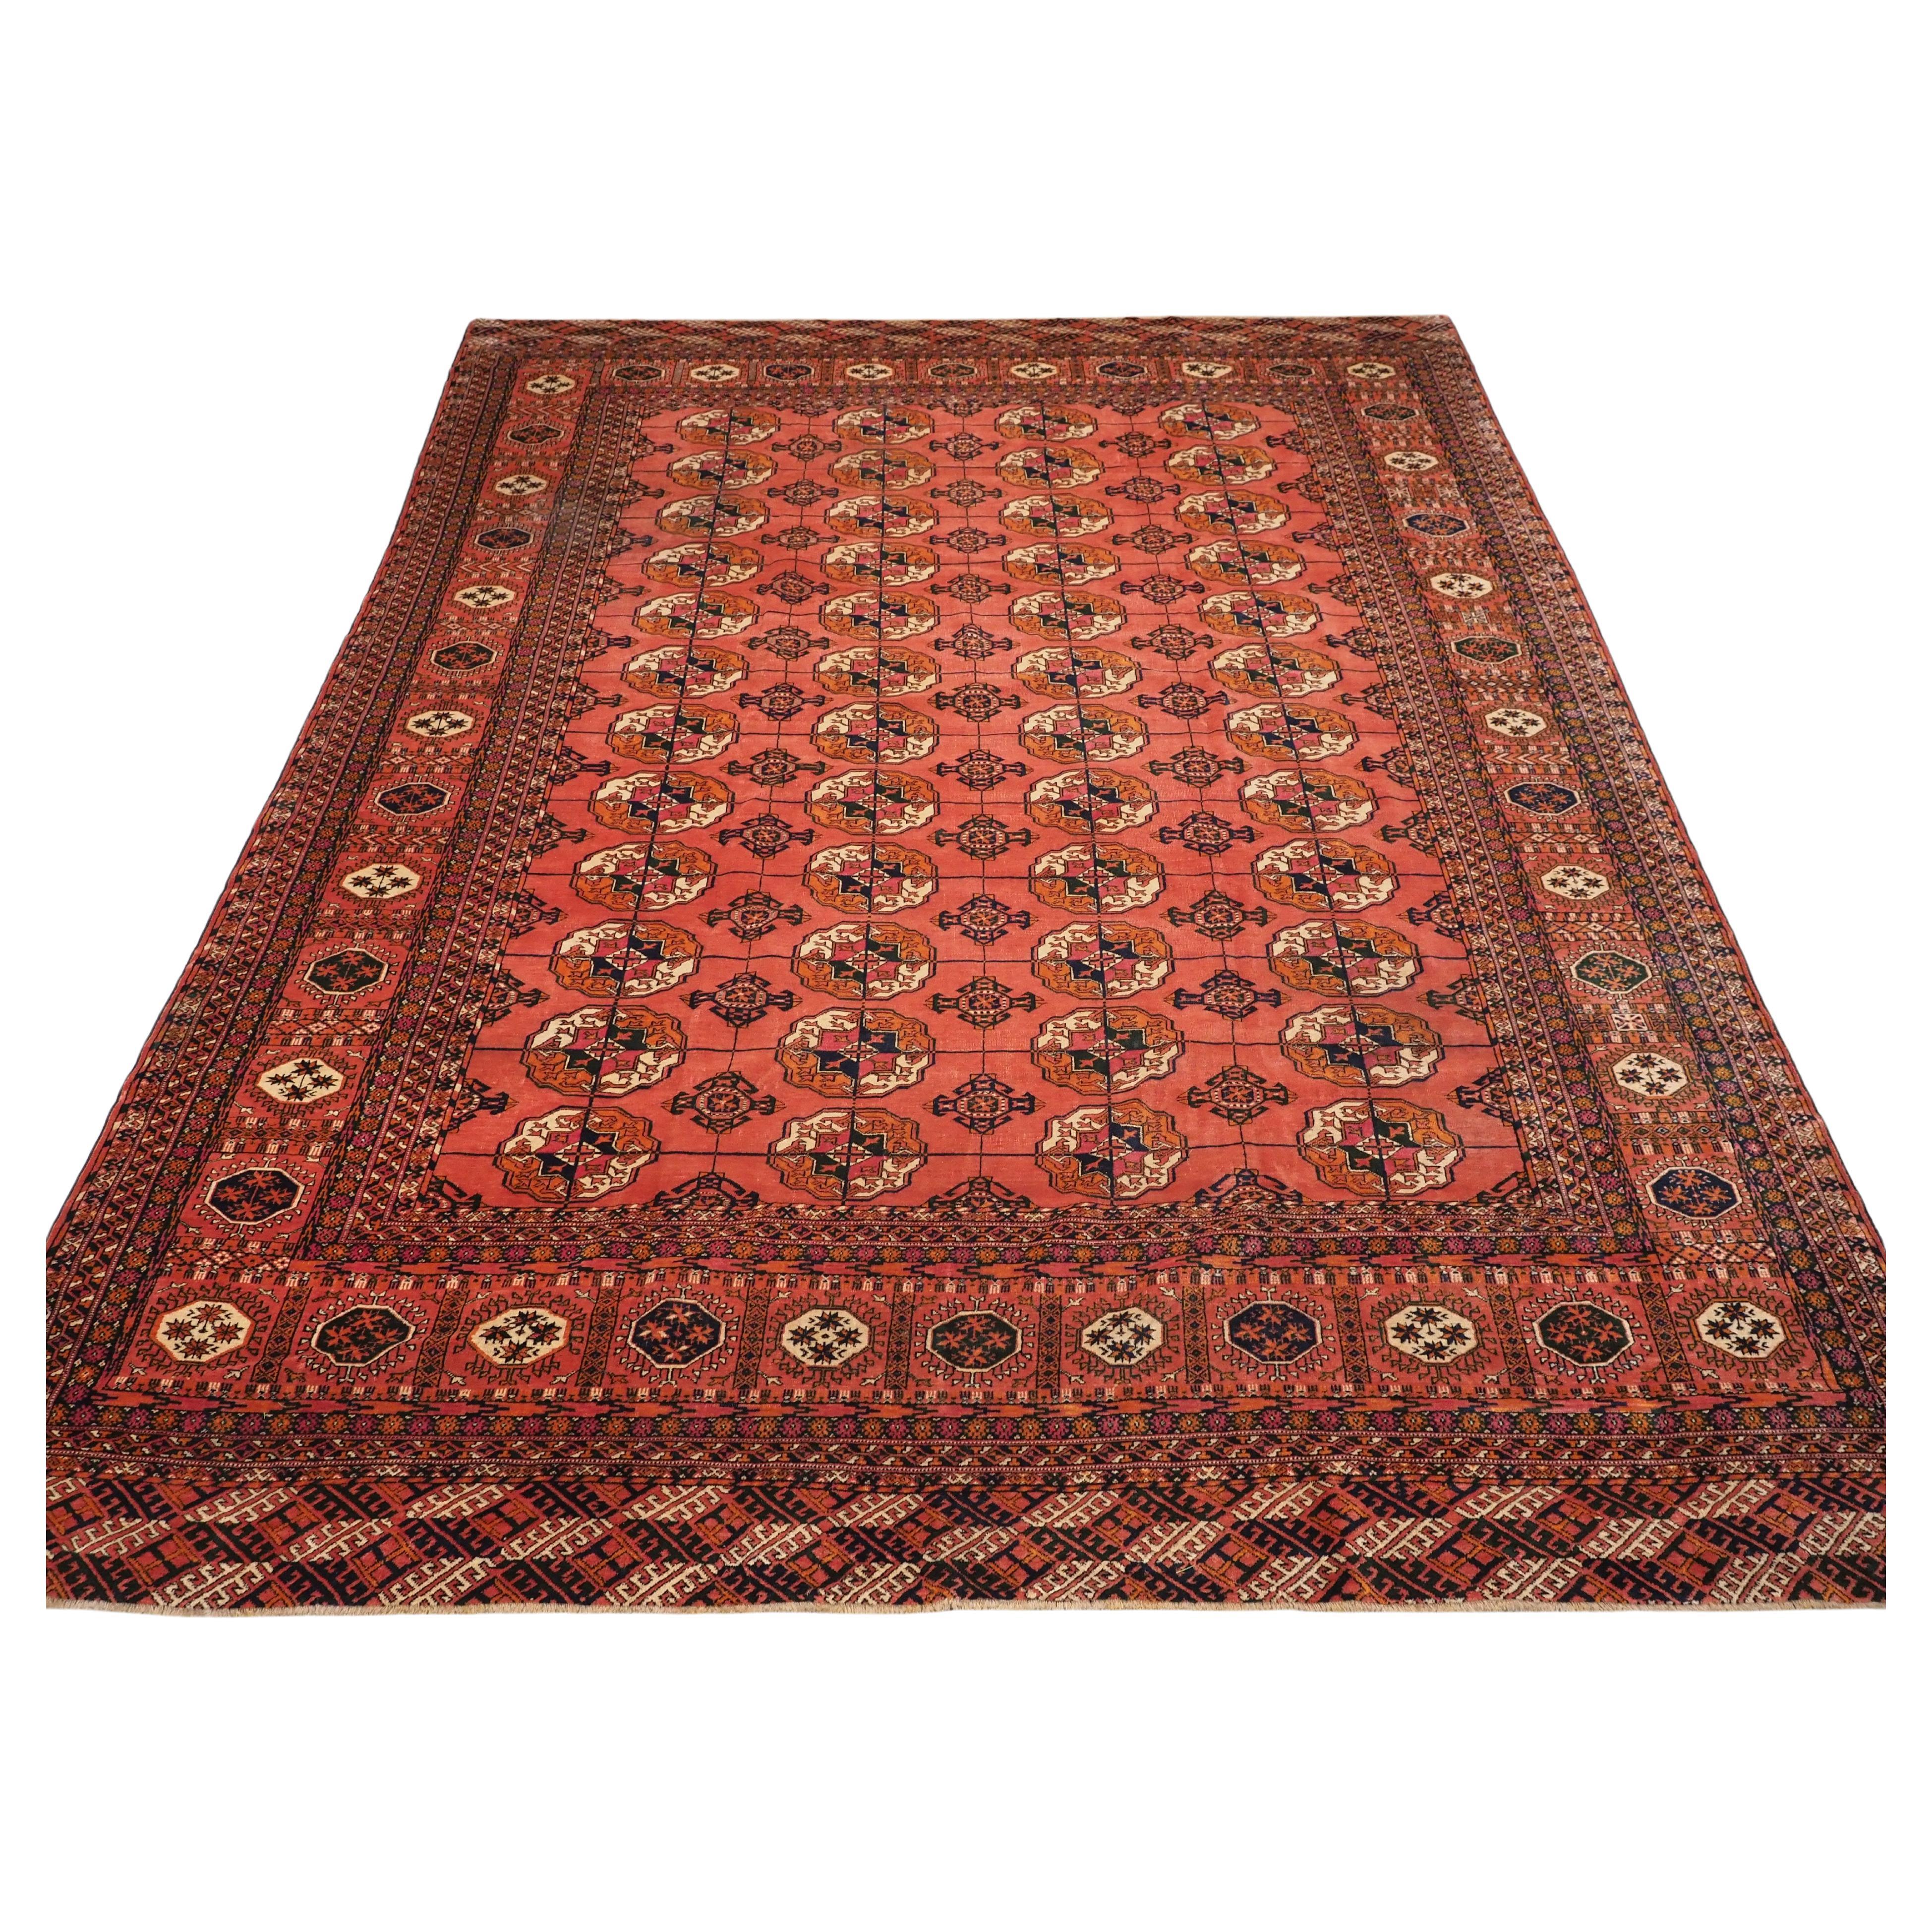 Antique Tekke Turkmen main carpet with 4 rows of 12 guls.  Circa 1900. For Sale